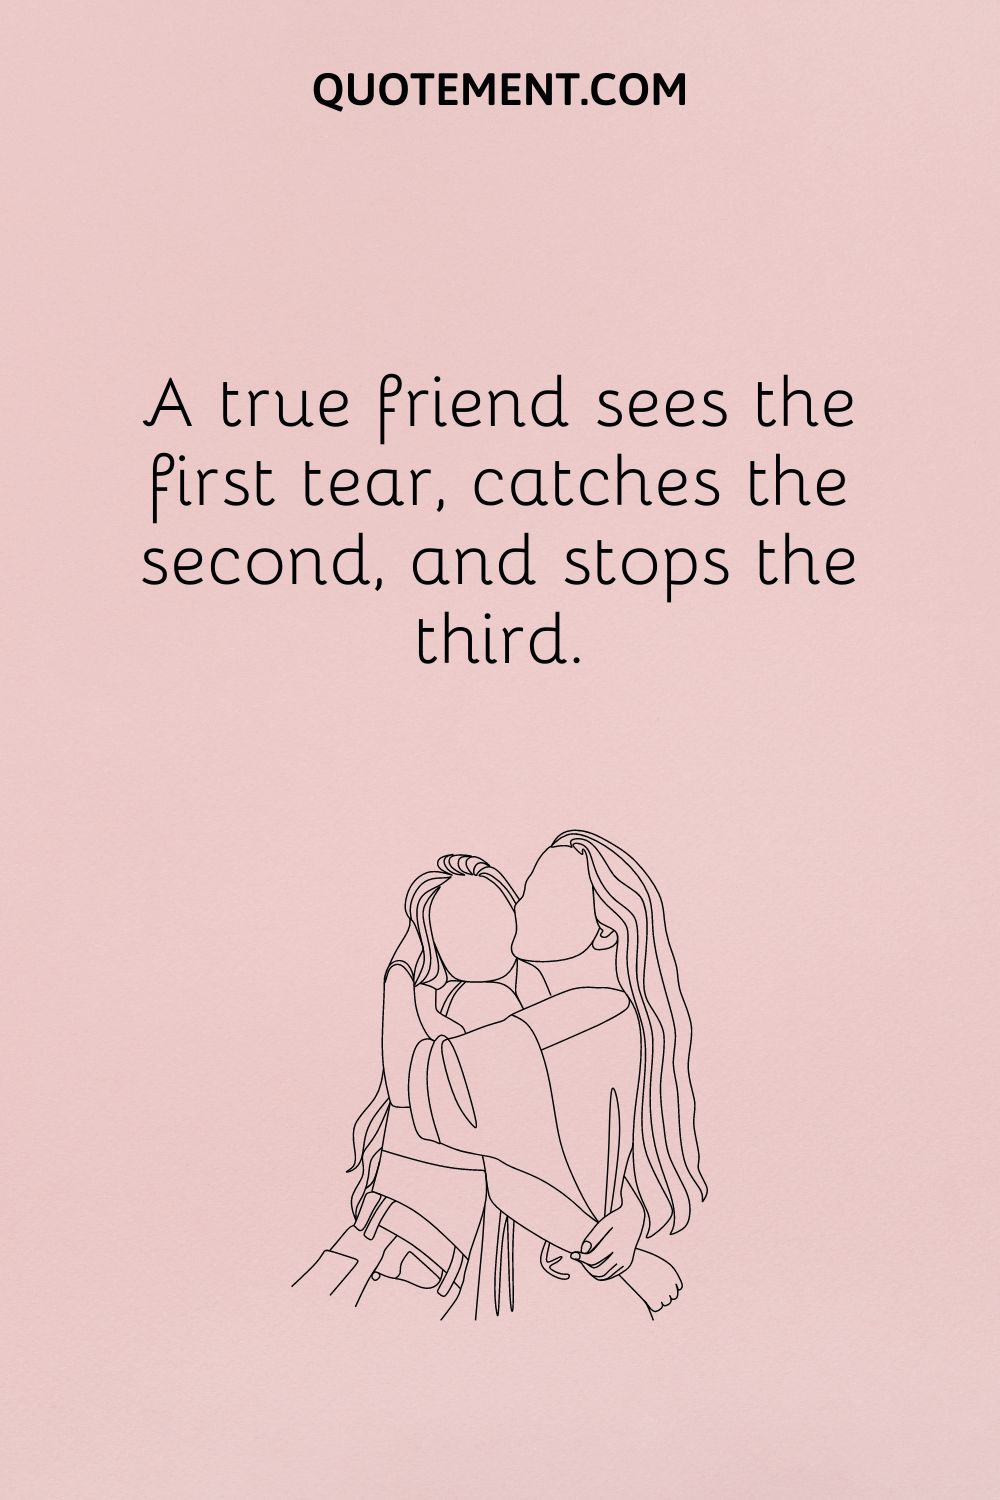 A true friend sees the first tear, catches the second, and stops the third.